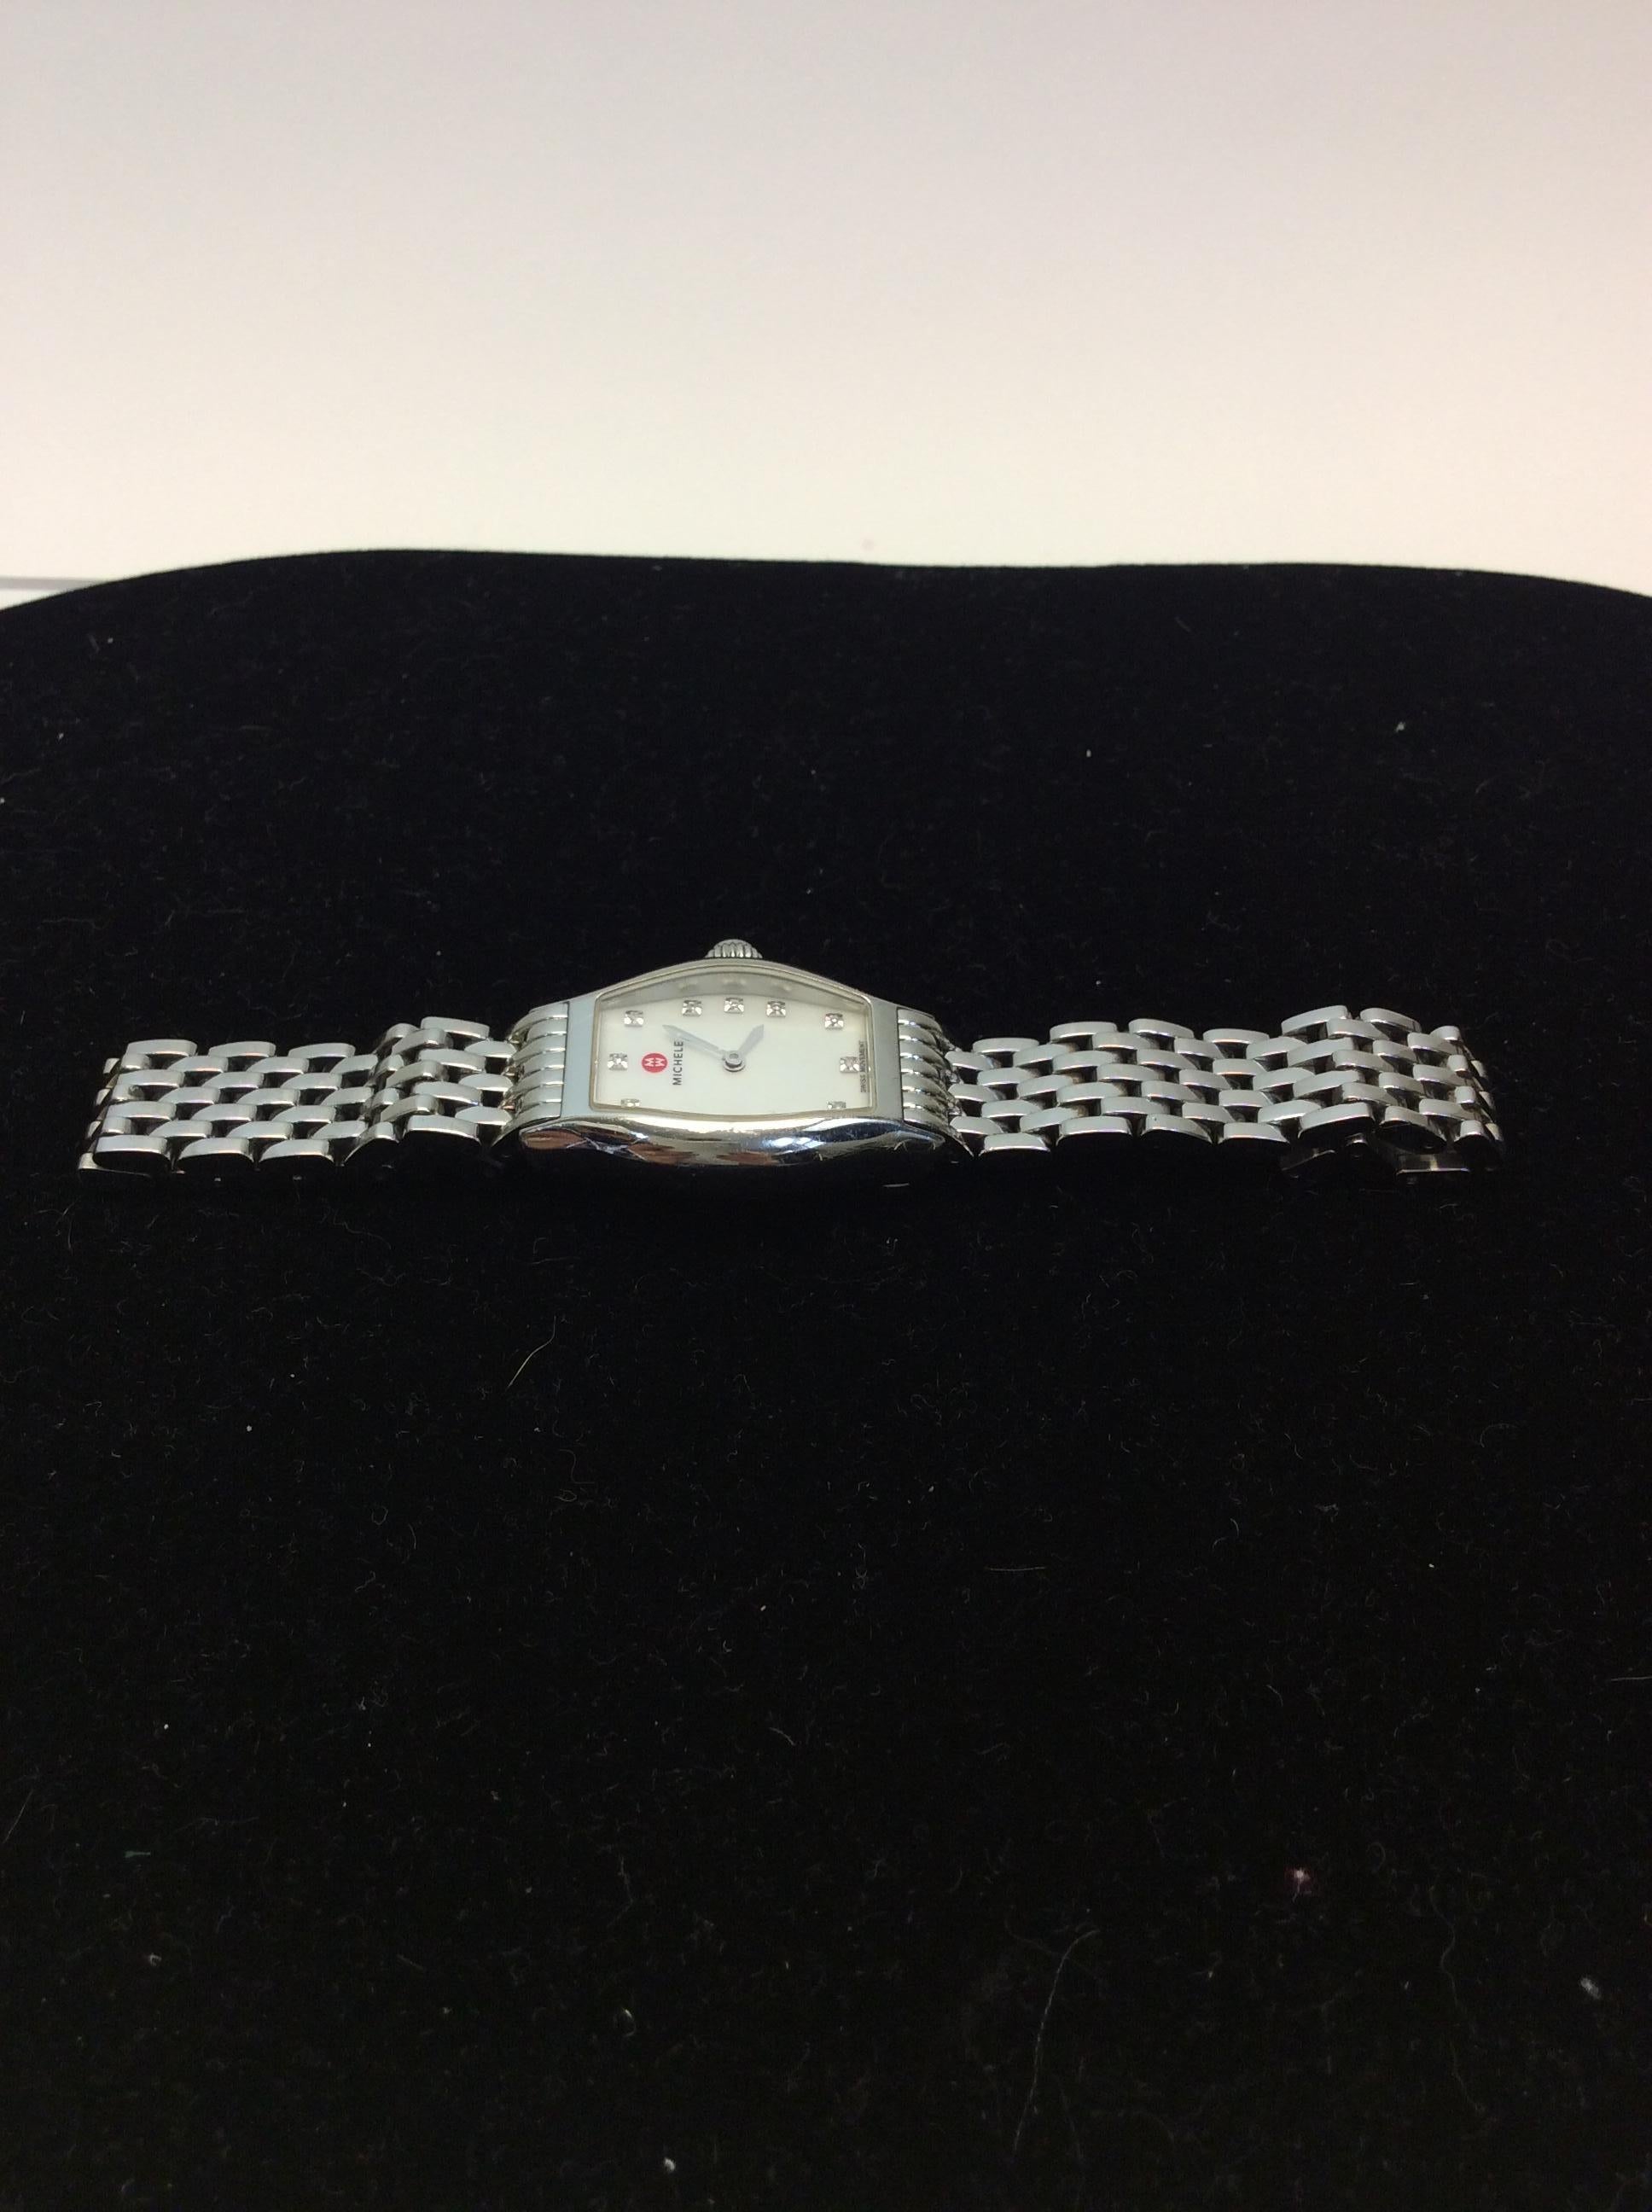 Michele Silver Stainless Steel Wrist Watch
$623
Stainless steel